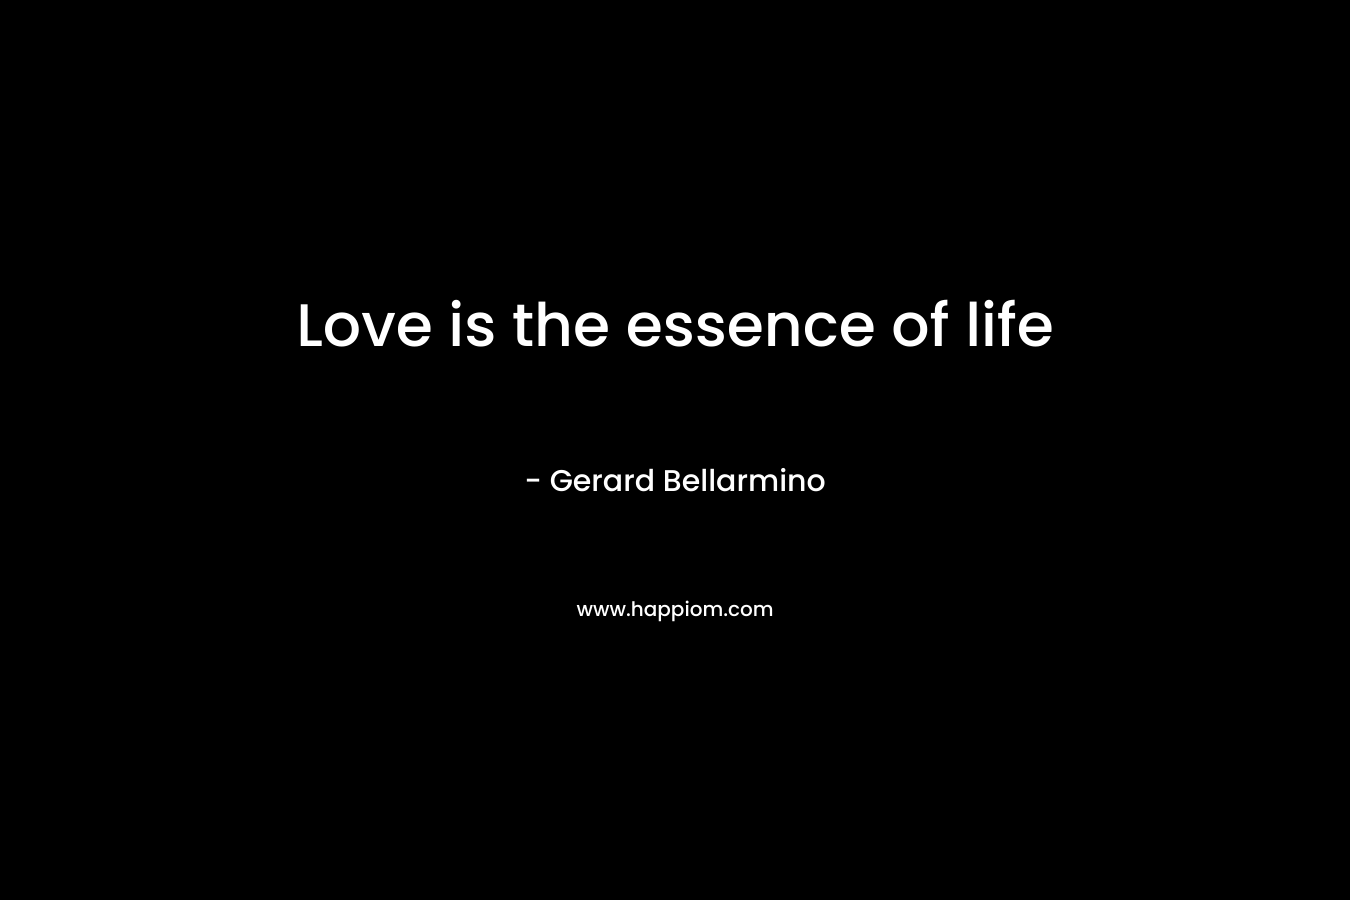 Love is the essence of life